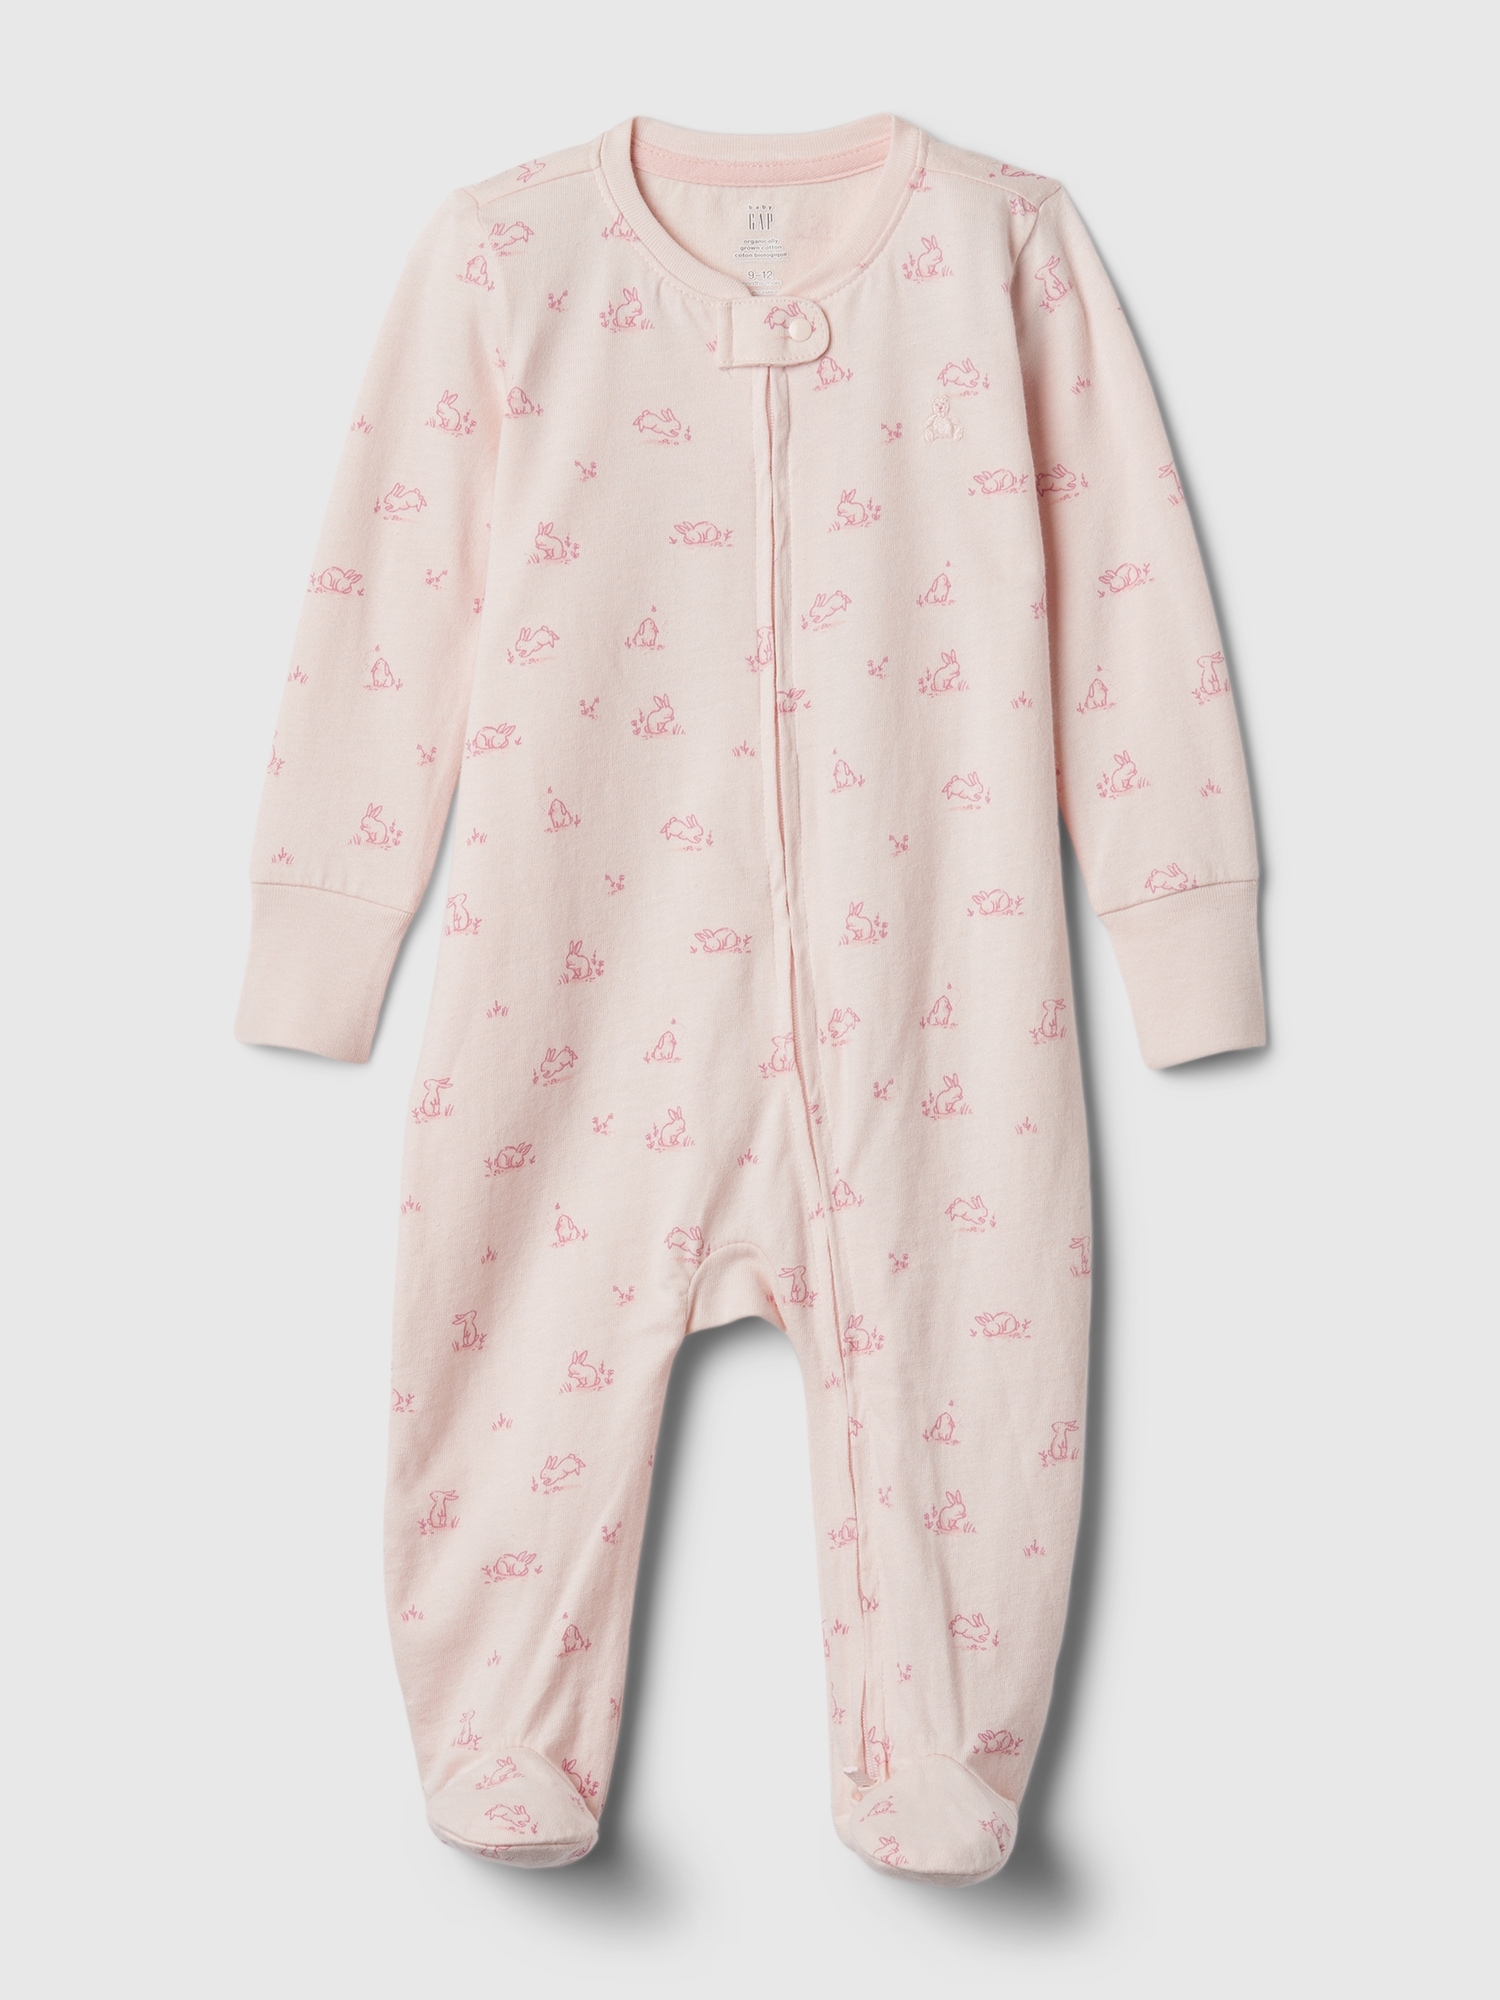 Gap Kids' Baby First Favorites Graphic One-piece In Barely Pink